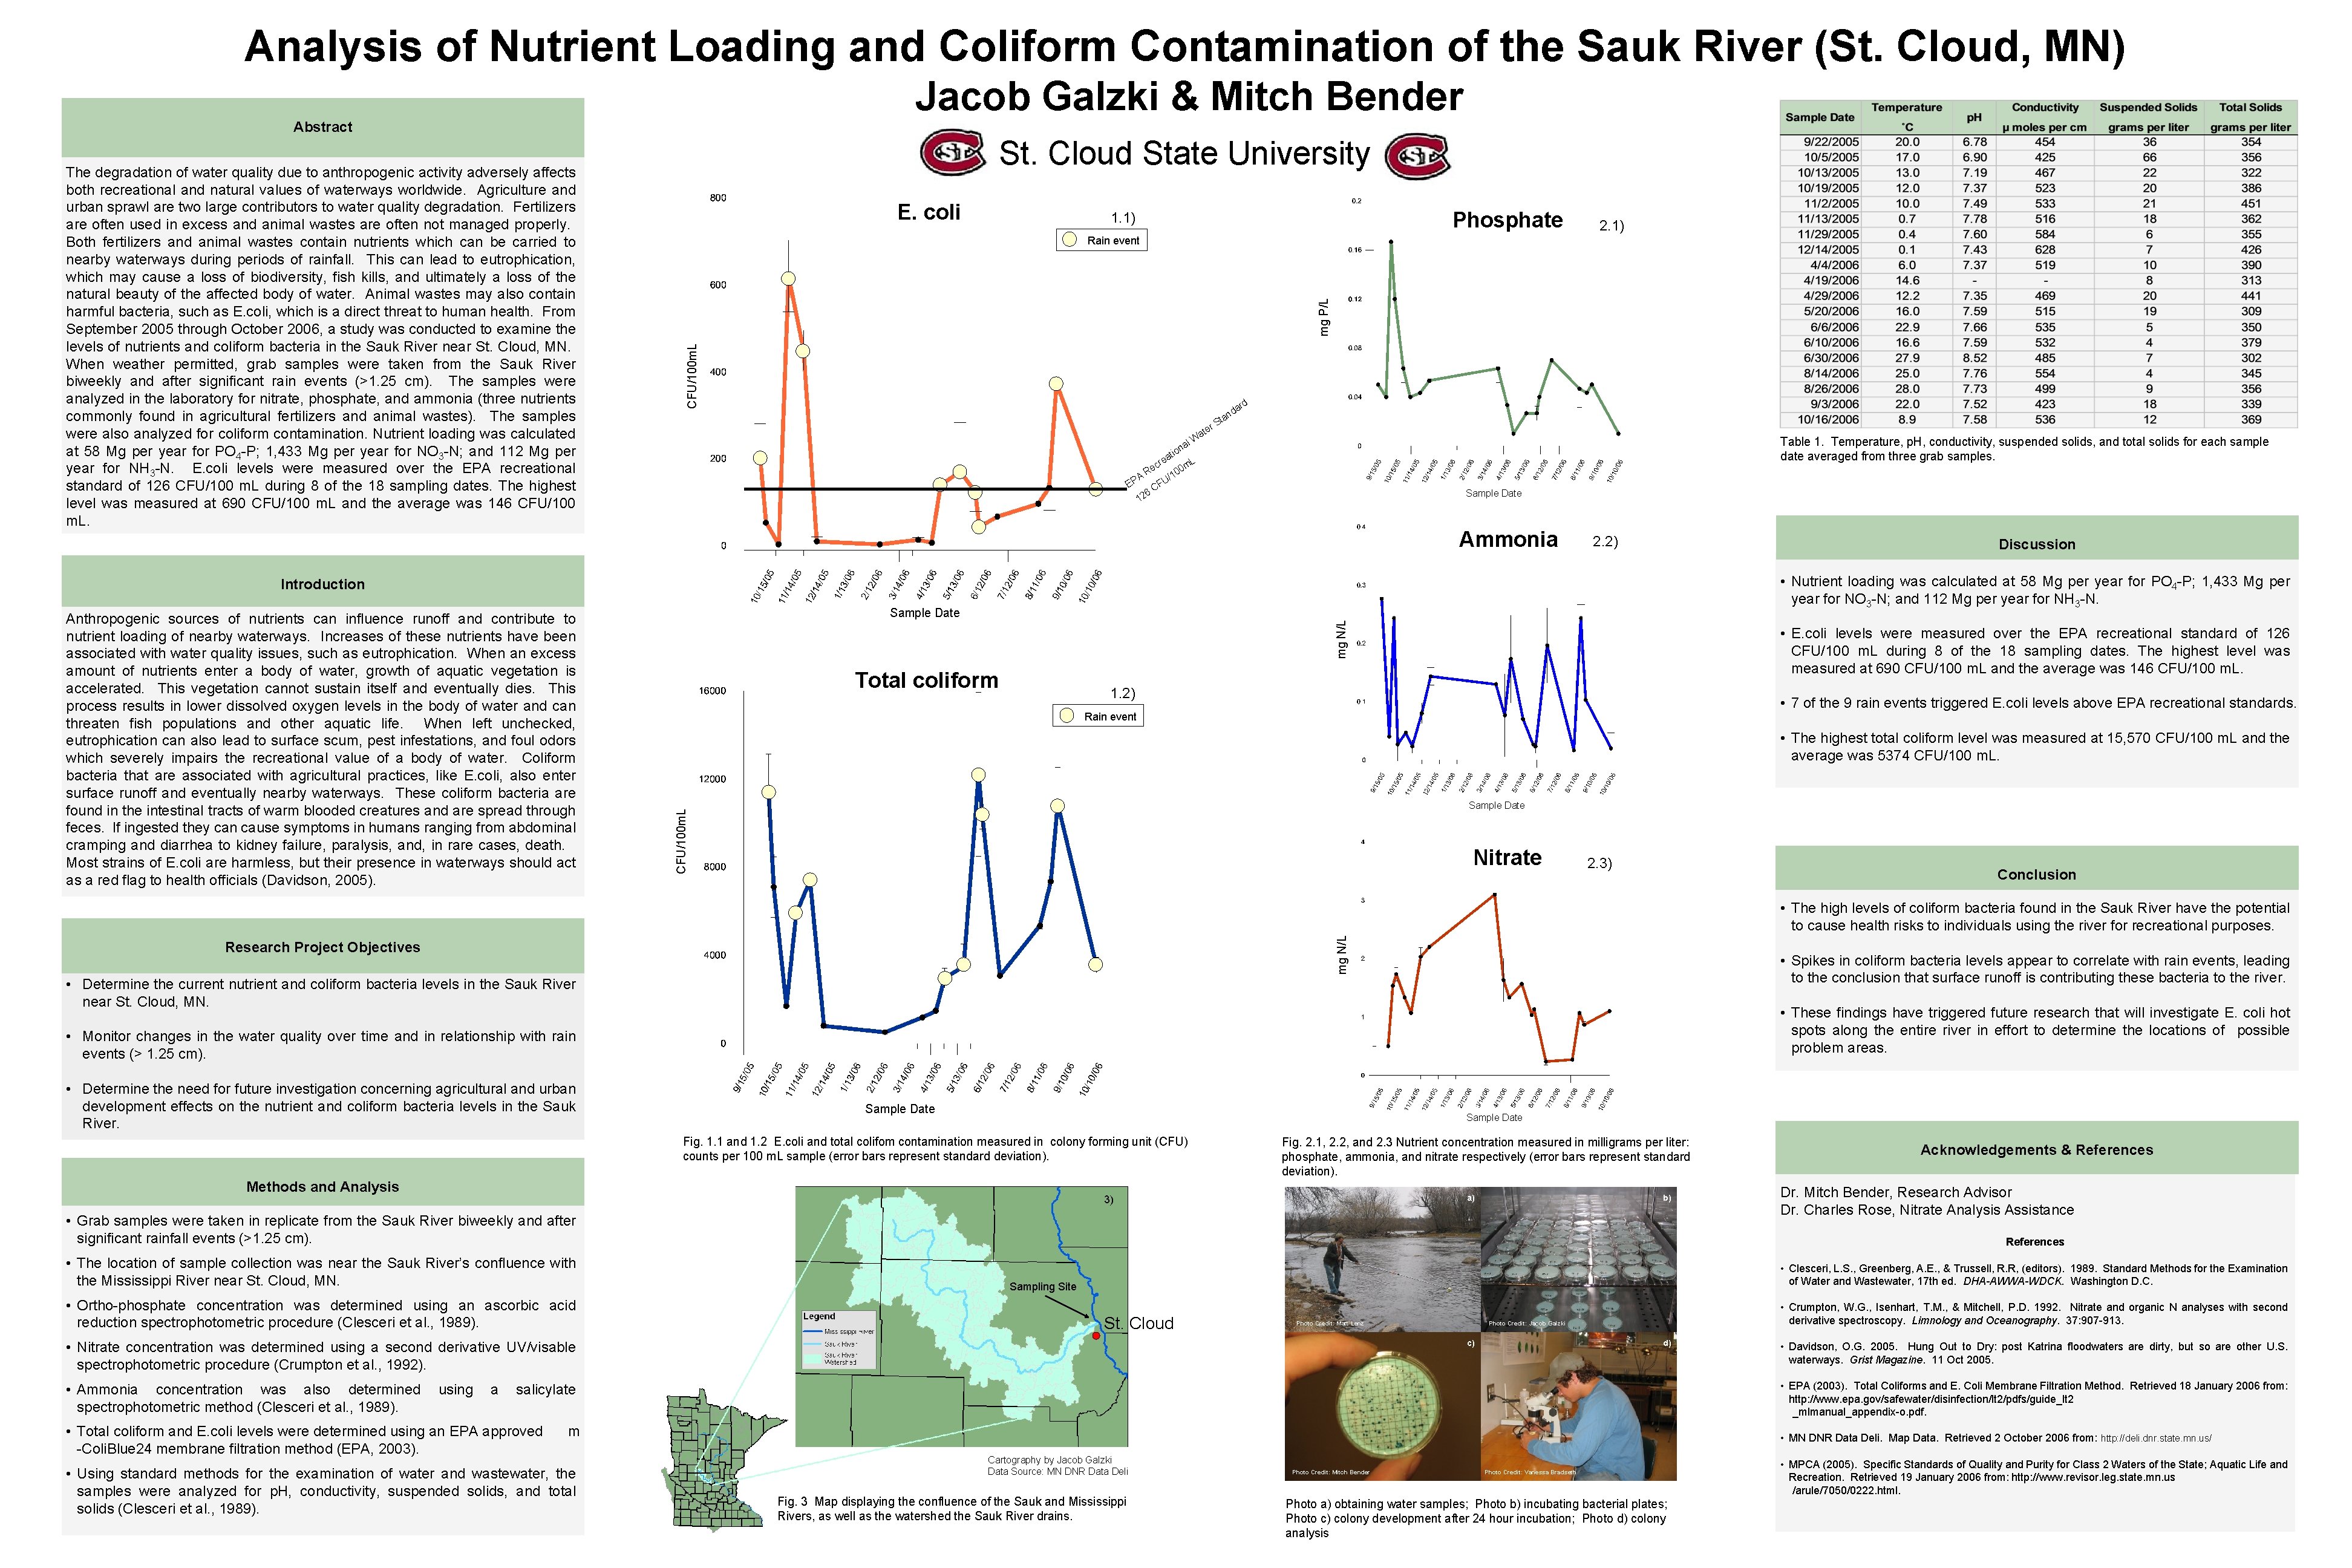 Analysis of Nutrient Loading and Coliform Contamination of the Sauk River (St. Cloud, MN)